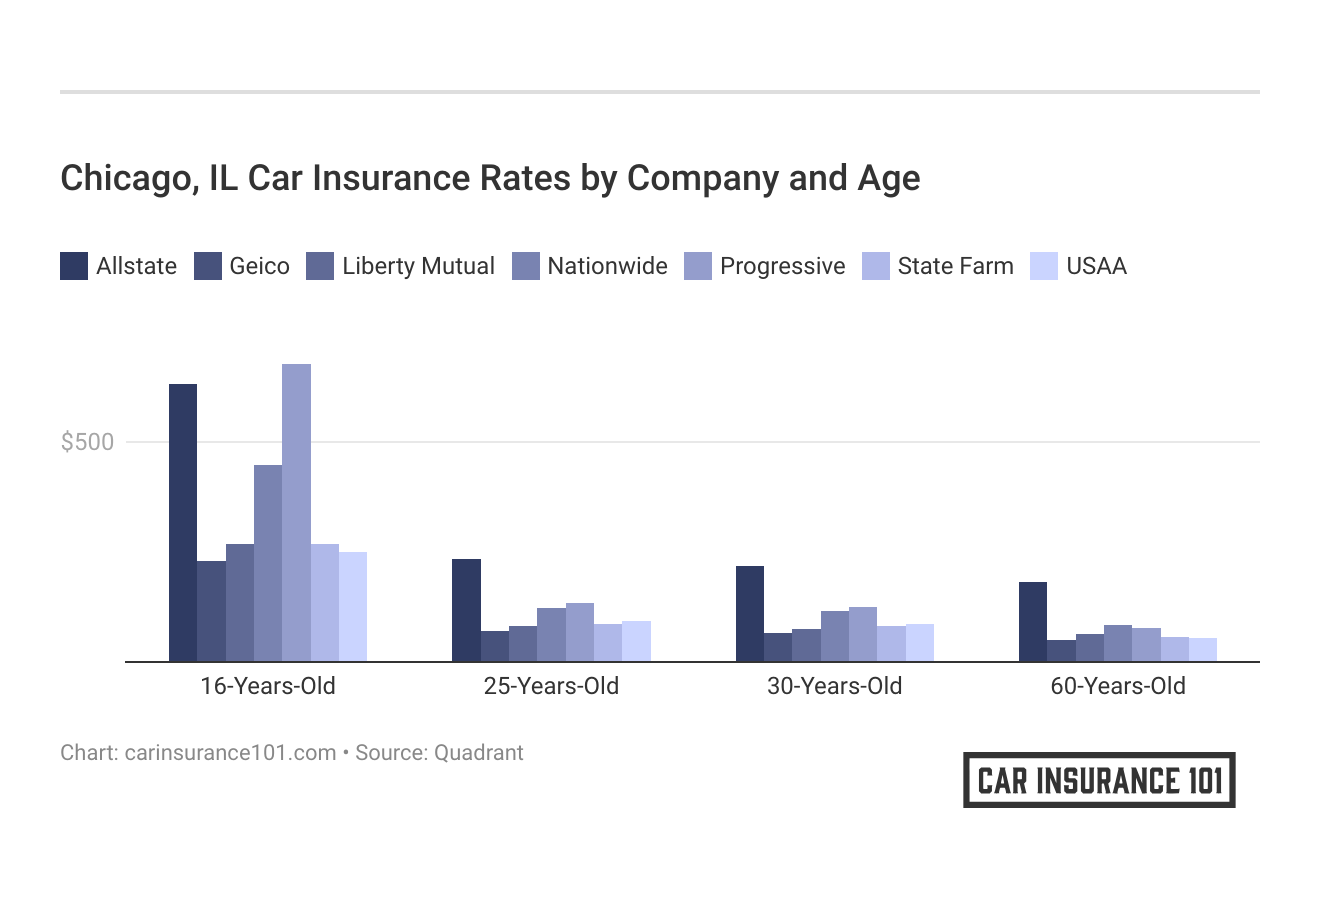 <h3>Chicago, IL Car Insurance Rates by Company and Age</h3>